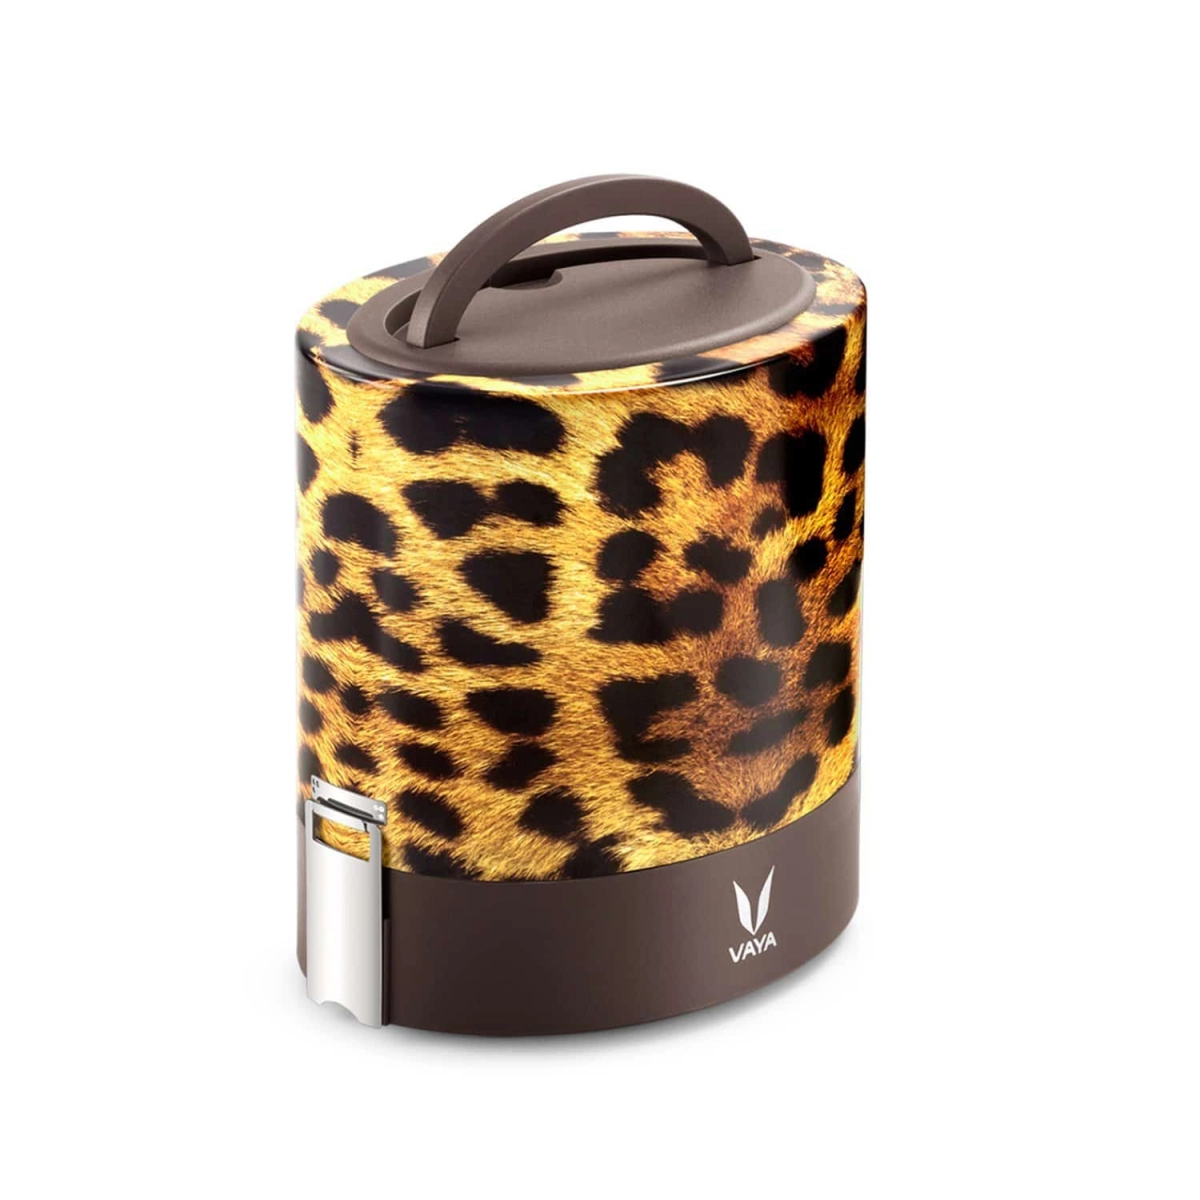 Lunch Box Stainless Steel Vaya Tiffin 1000ml, 3 SS Containers